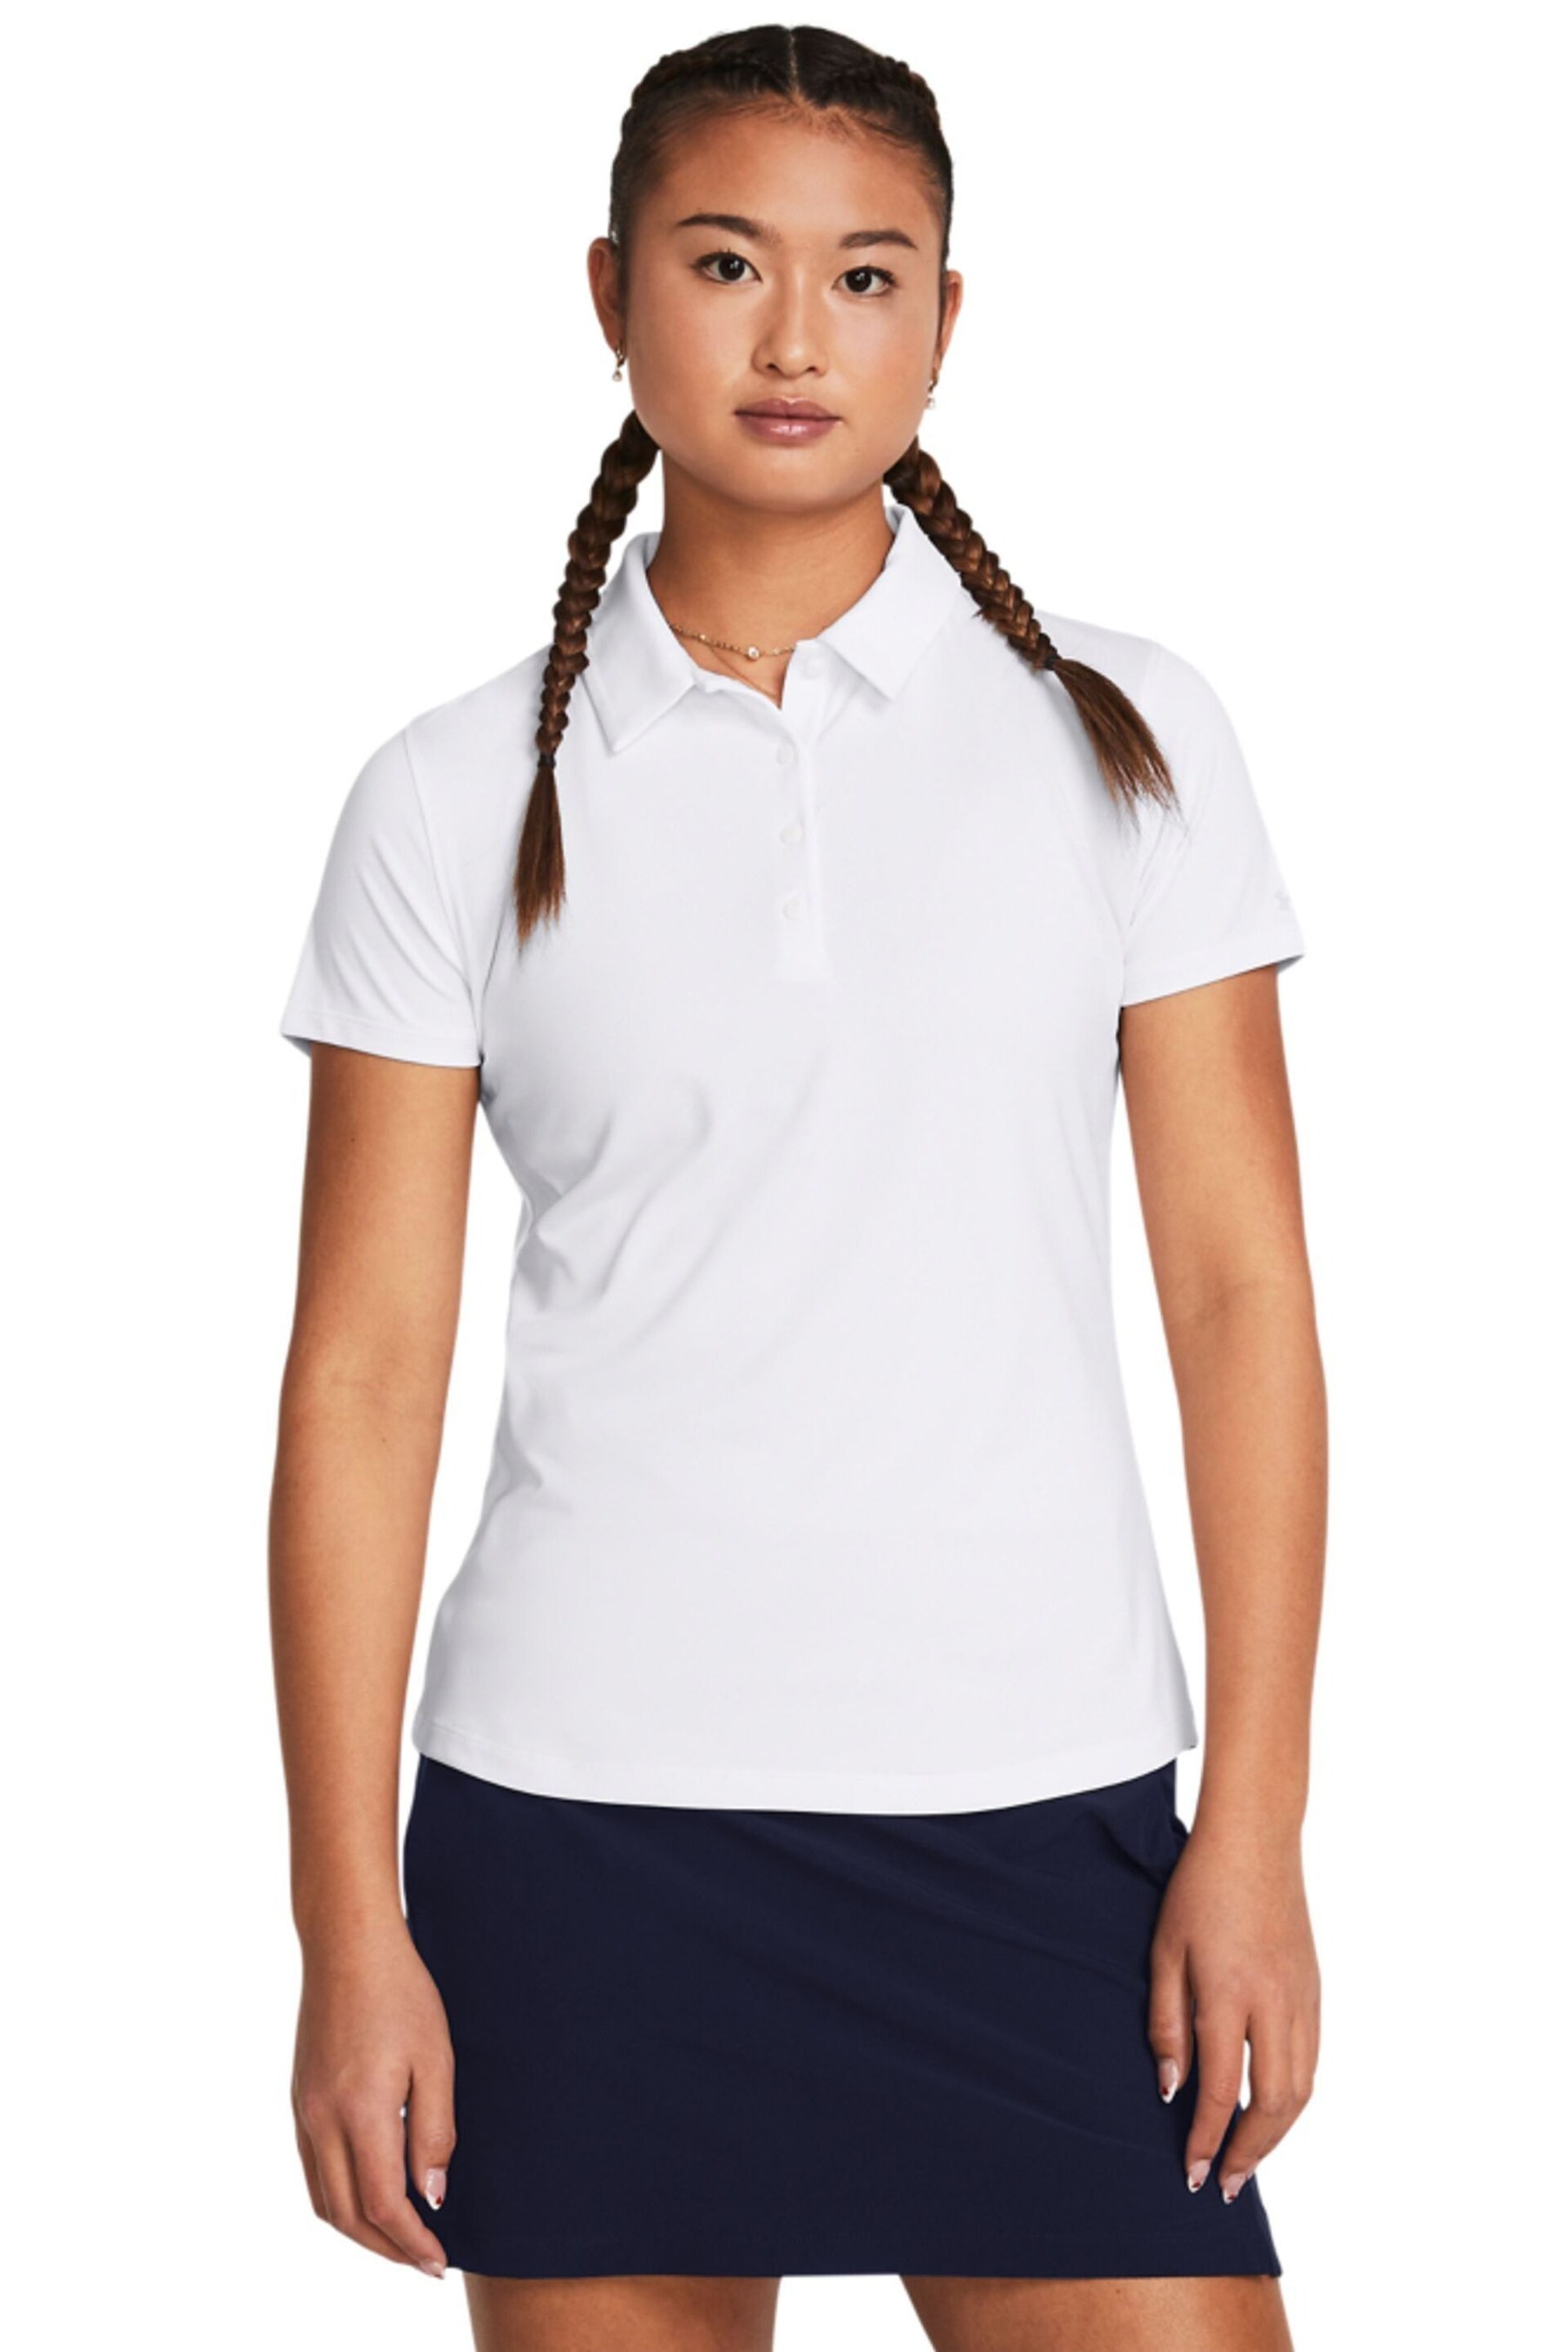 Under Armour White/Black Play Off Small Logo Polo Shirt - Image 1 of 4